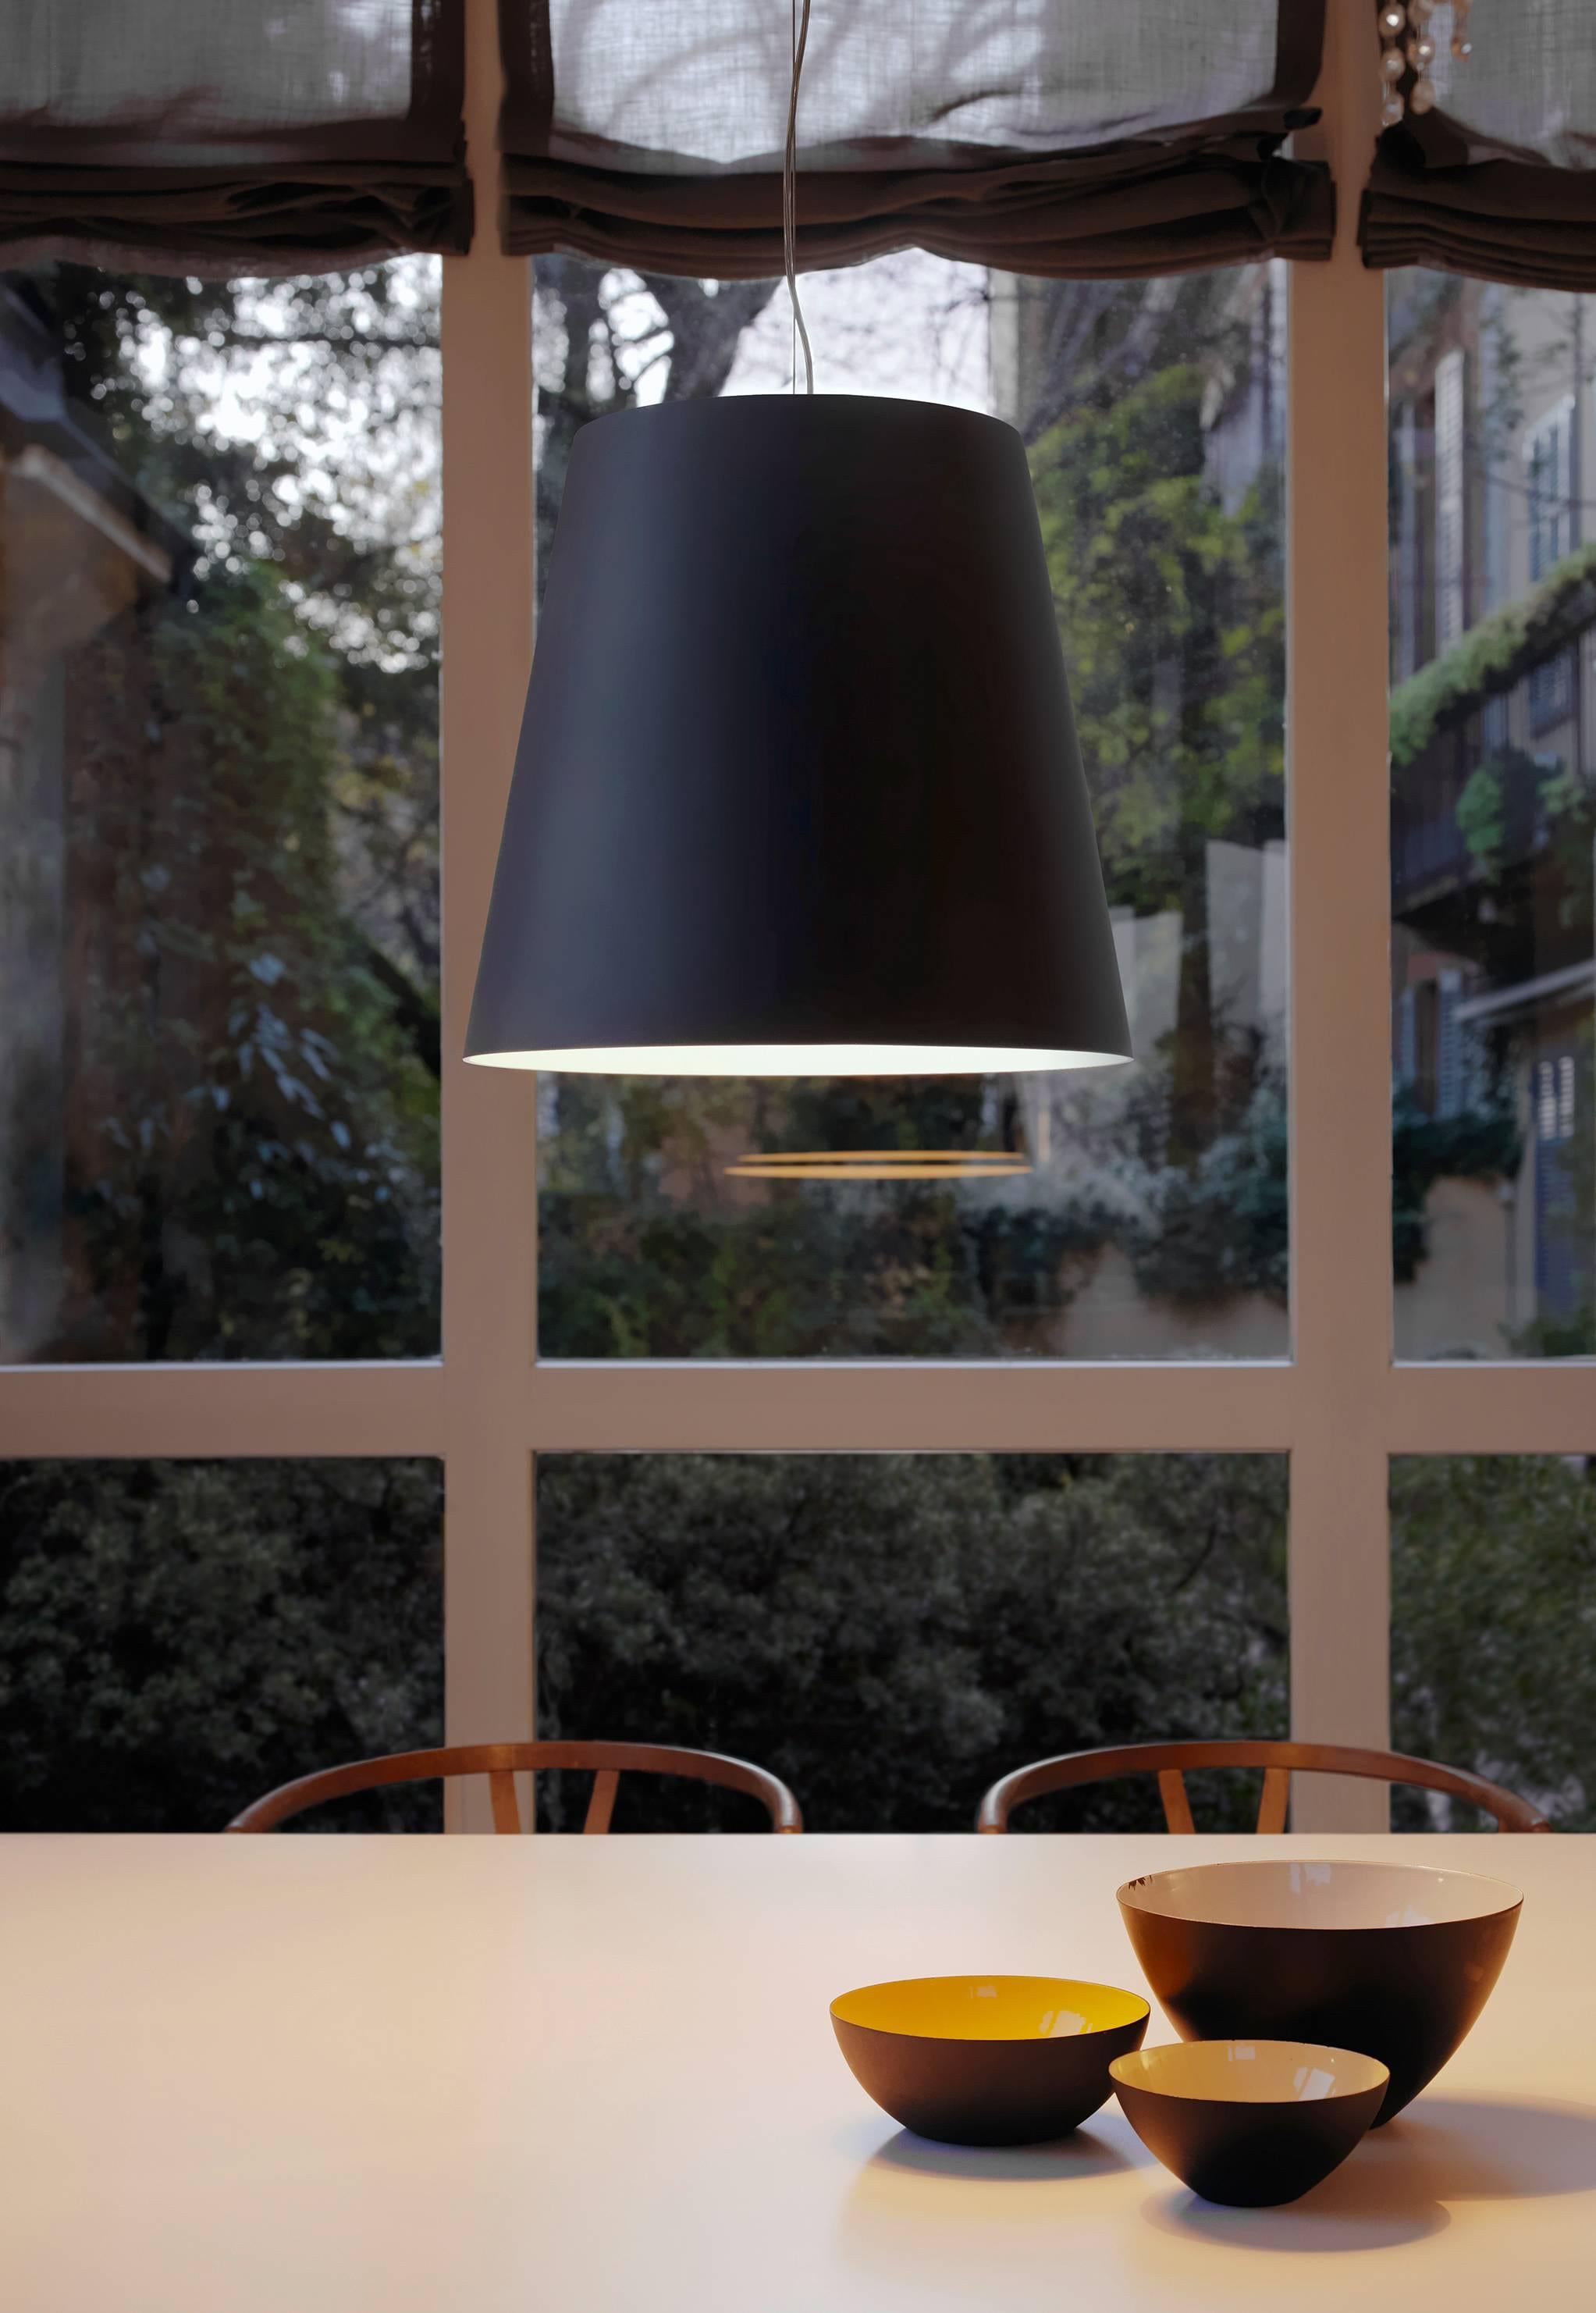 Designed in 2003 by Charles Williams for Fontana Arte, the Amax suspension lamp is an extra-large interpretation of the Classic FontanaArte lampshade. Amax is a family of suspension and floor lamps, available in both indoor and outdoor versions. For